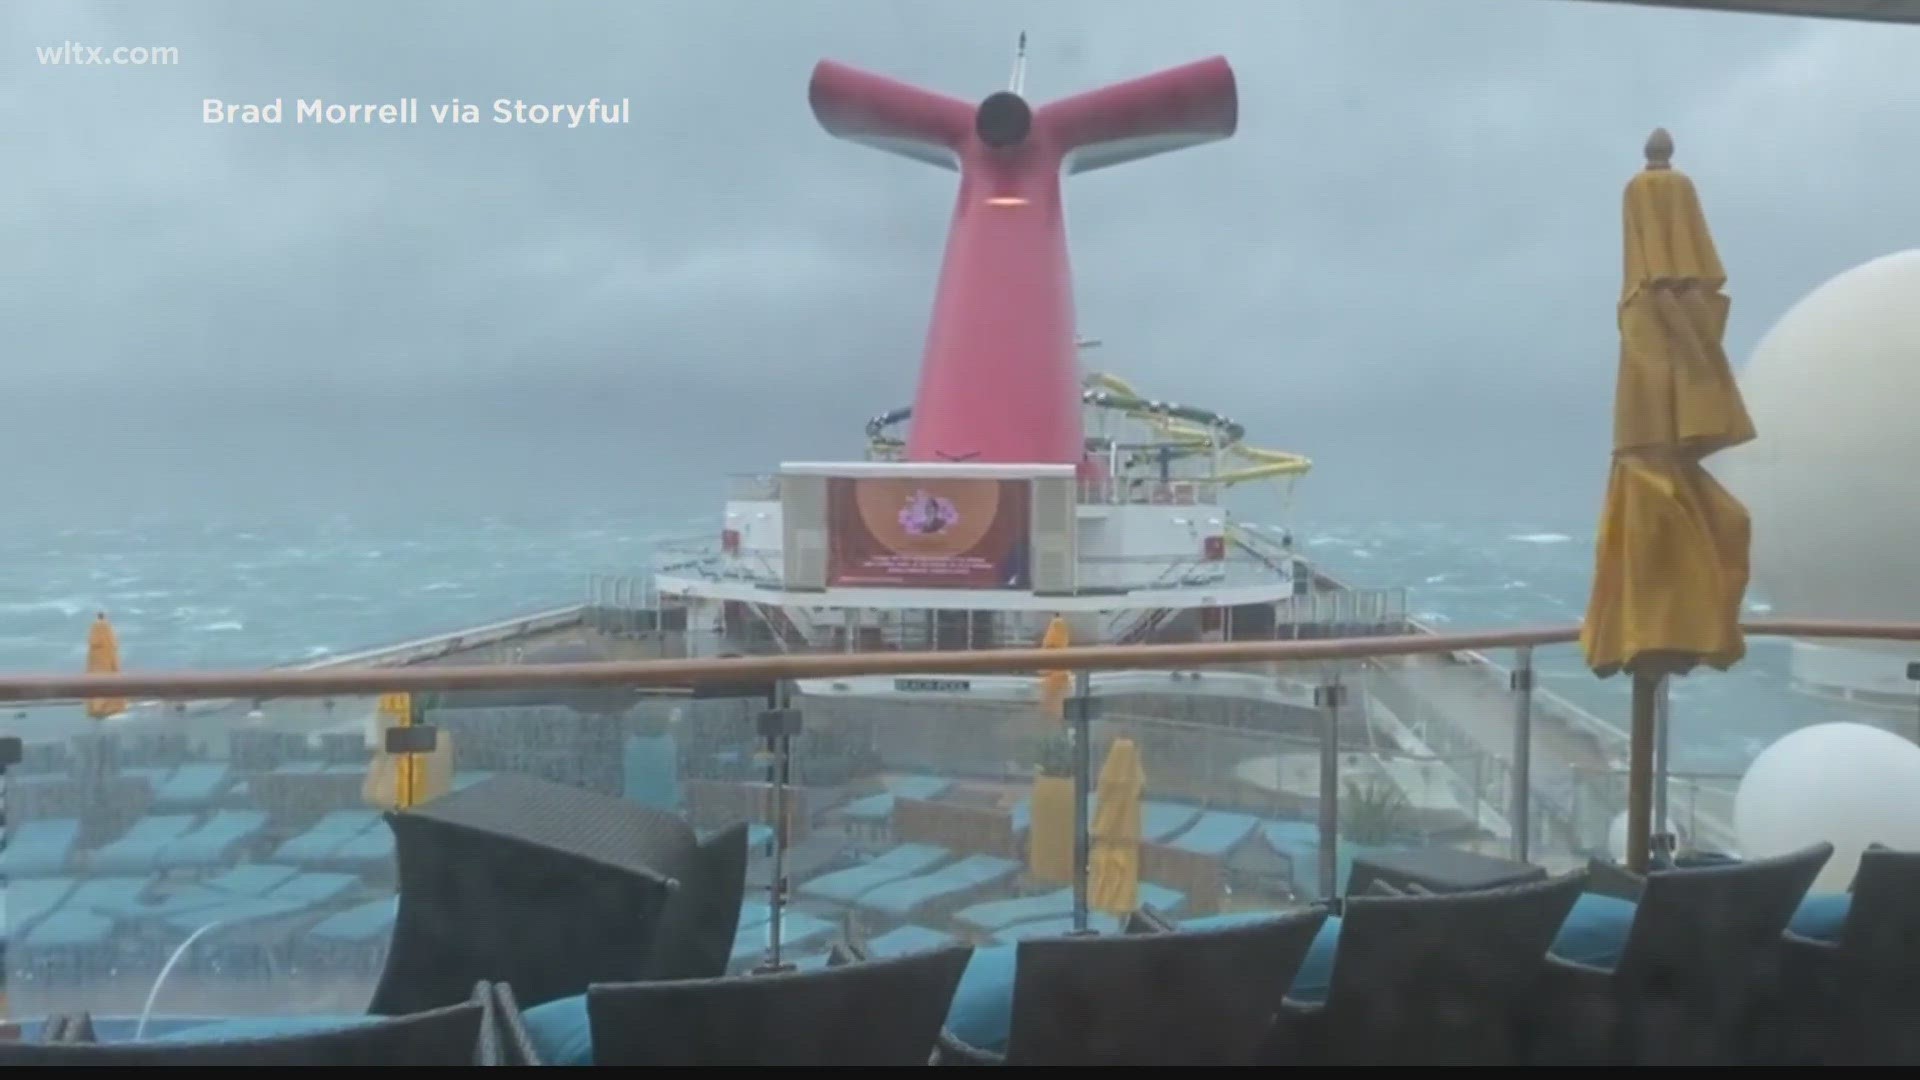 The Carnival Sunshine's return to Charleston, South Carolina, from the Bahamas on Saturday was delayed by prolonged bad weather and rough seas in the area.